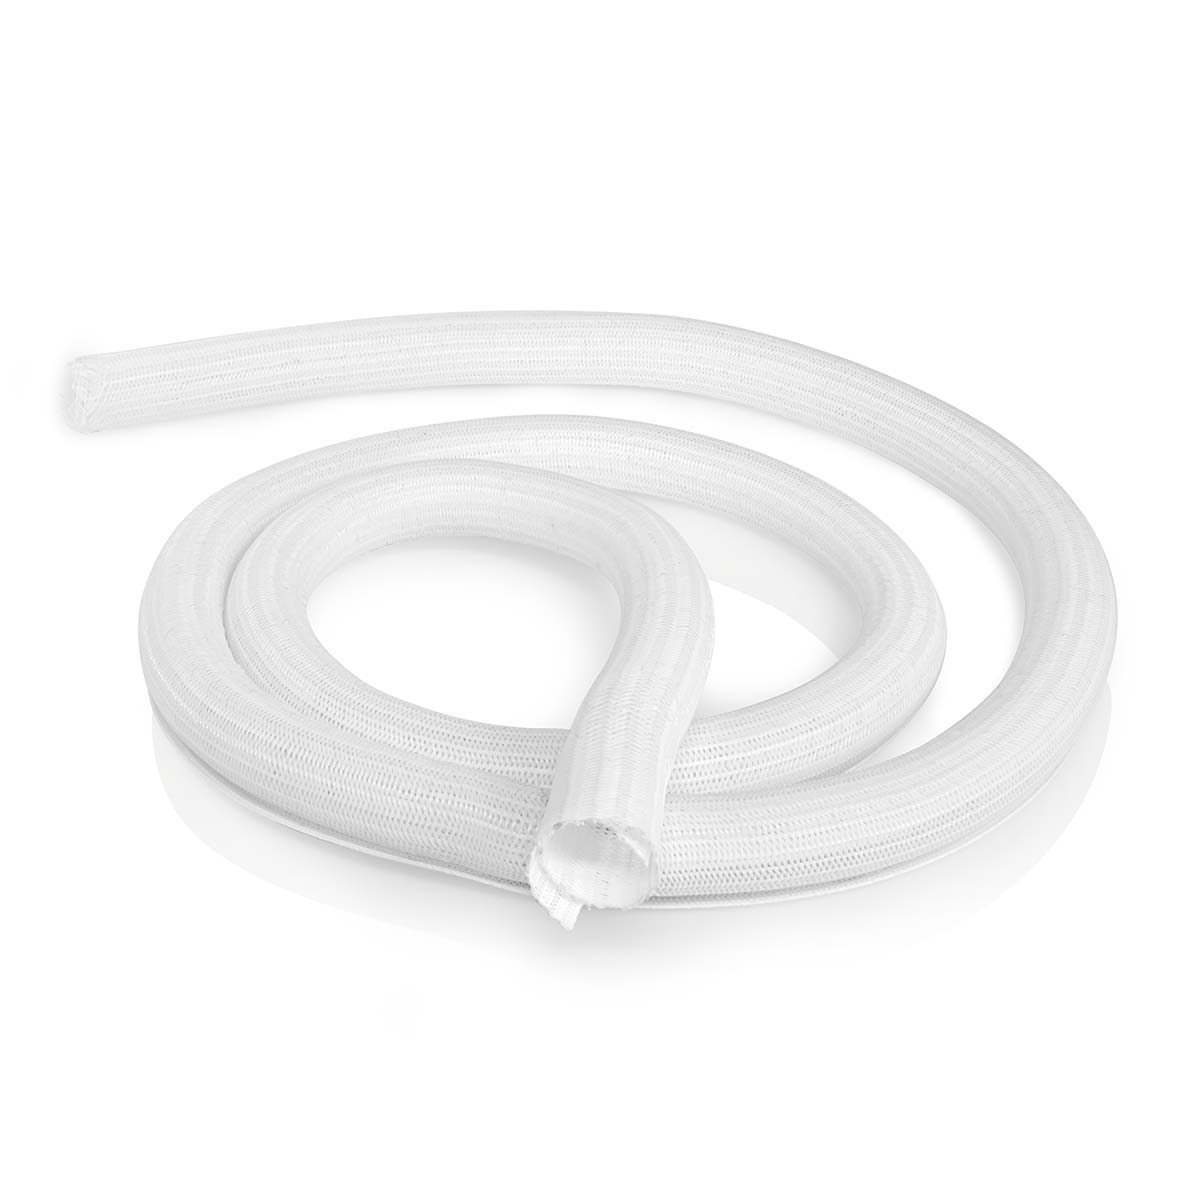 Cable Management | Sleeve | 1 pcs | Maximum cable thickness: 30 mm ...